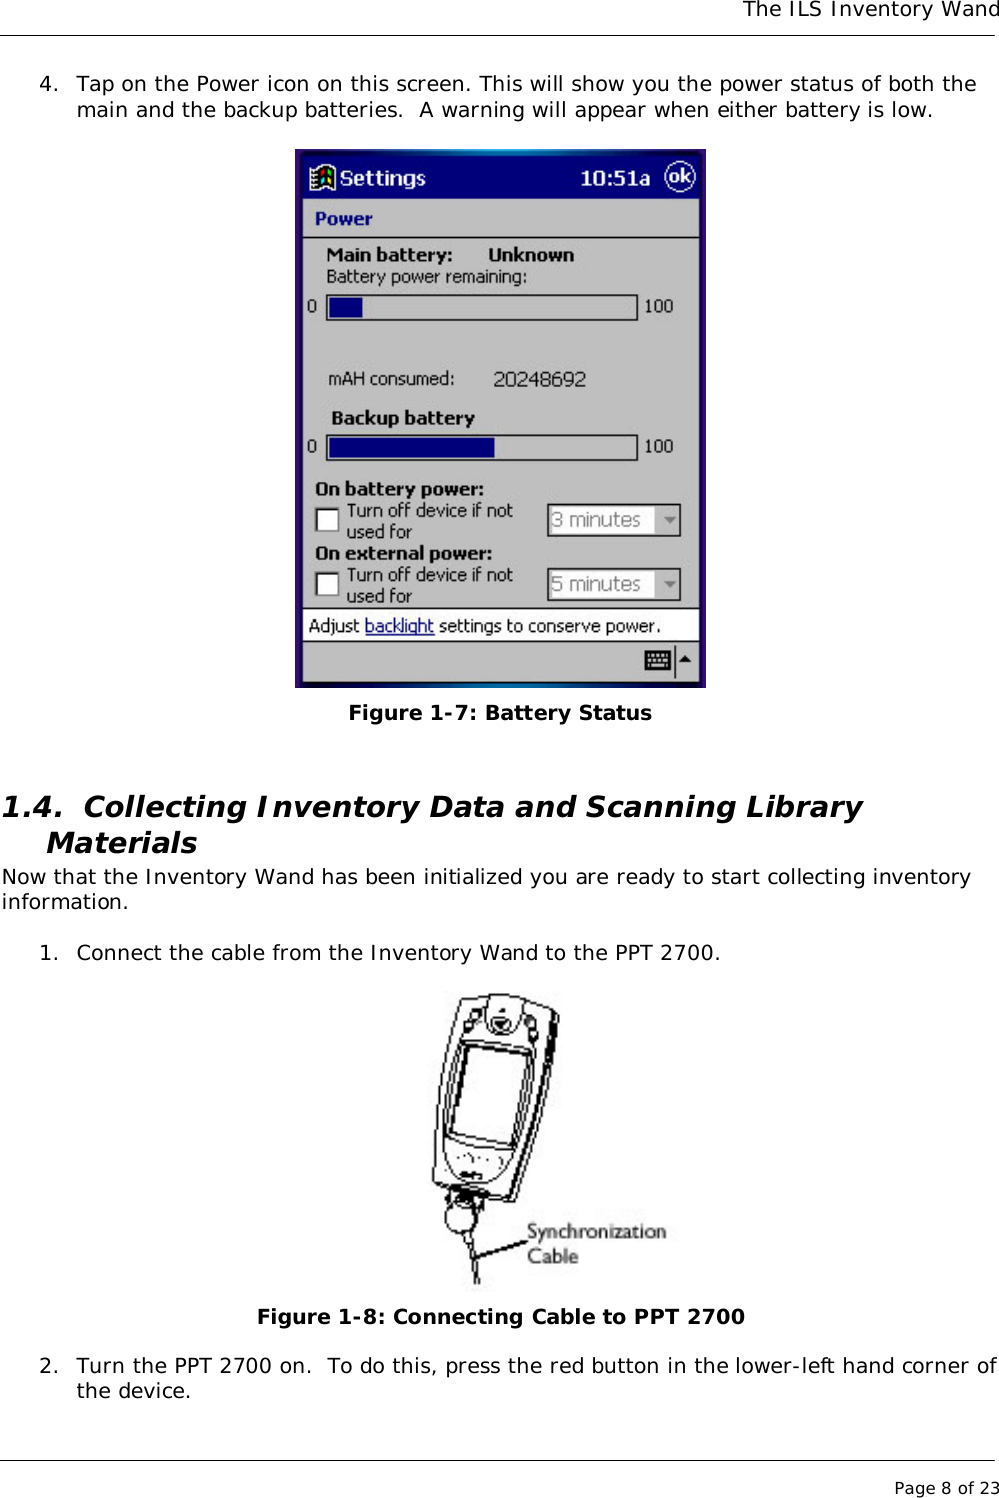 The ILS Inventory WandPage 8 of 234. Tap on the Power icon on this screen. This will show you the power status of both themain and the backup batteries.  A warning will appear when either battery is low.Figure 1-7: Battery Status1.4. Collecting Inventory Data and Scanning LibraryMaterialsNow that the Inventory Wand has been initialized you are ready to start collecting inventoryinformation.1. Connect the cable from the Inventory Wand to the PPT 2700.Figure 1-8: Connecting Cable to PPT 27002. Turn the PPT 2700 on.  To do this, press the red button in the lower-left hand corner ofthe device.